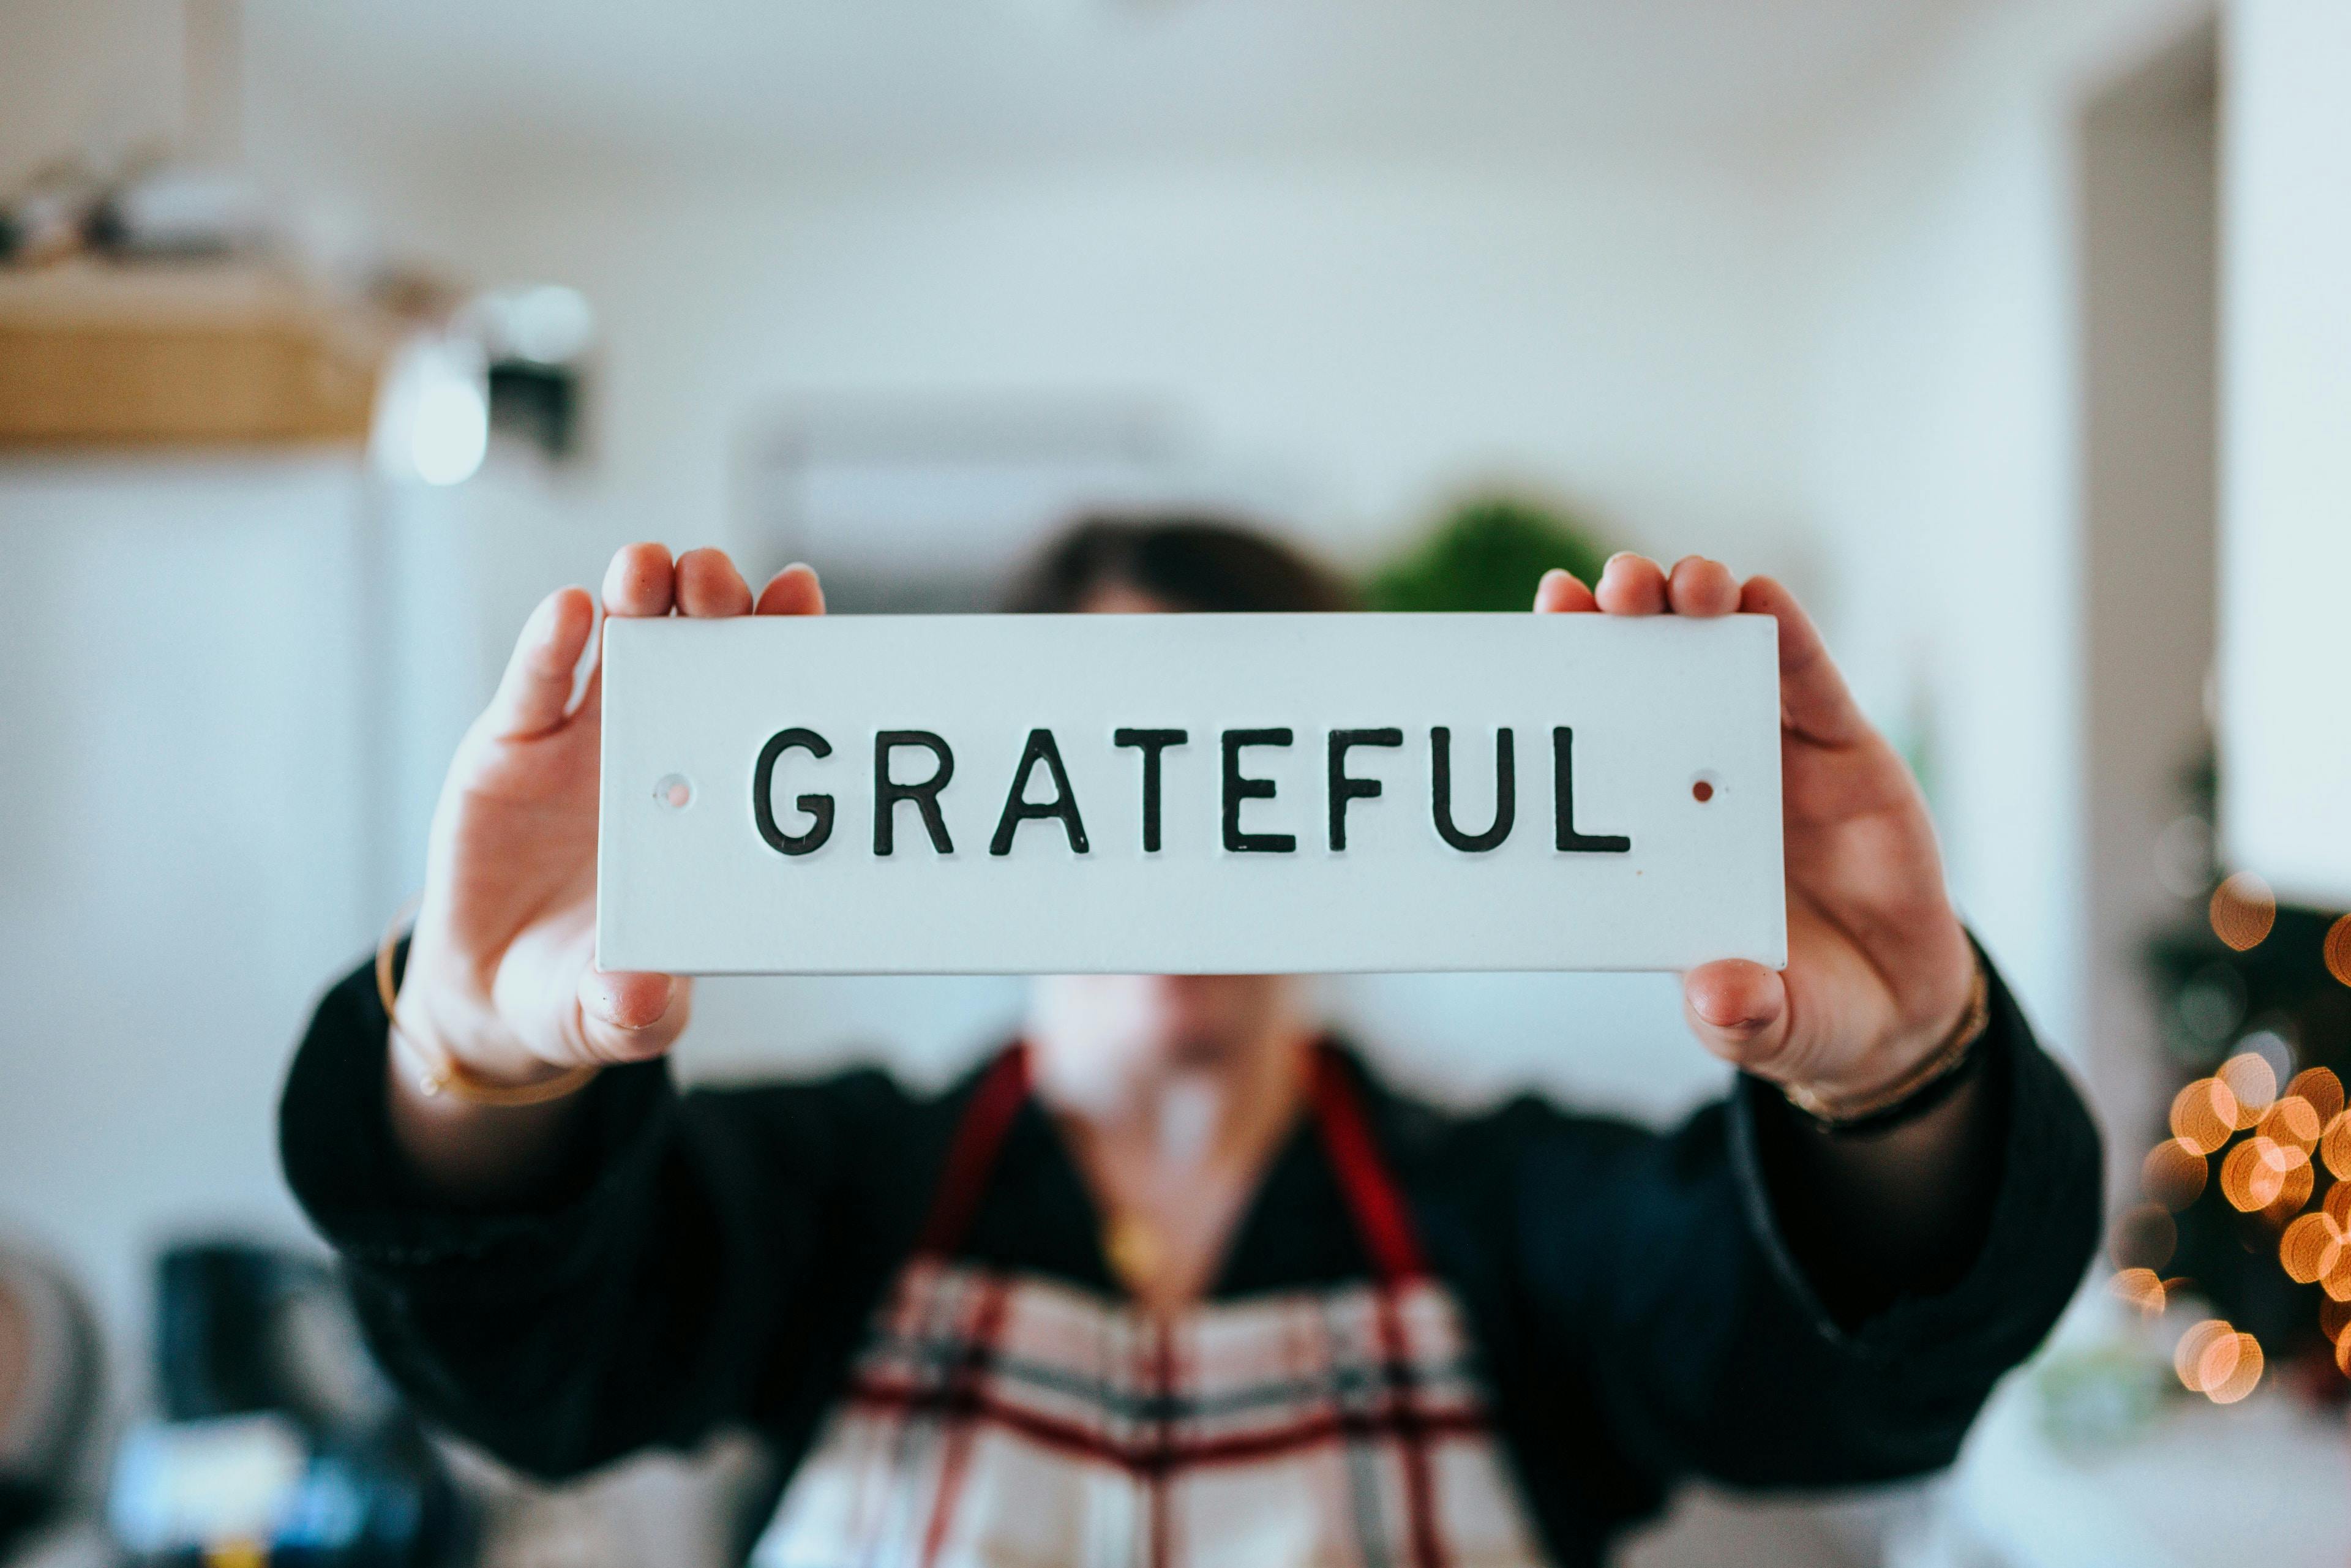 The Role of Gratitude in Daily Life: Finding Joy in the Little Things